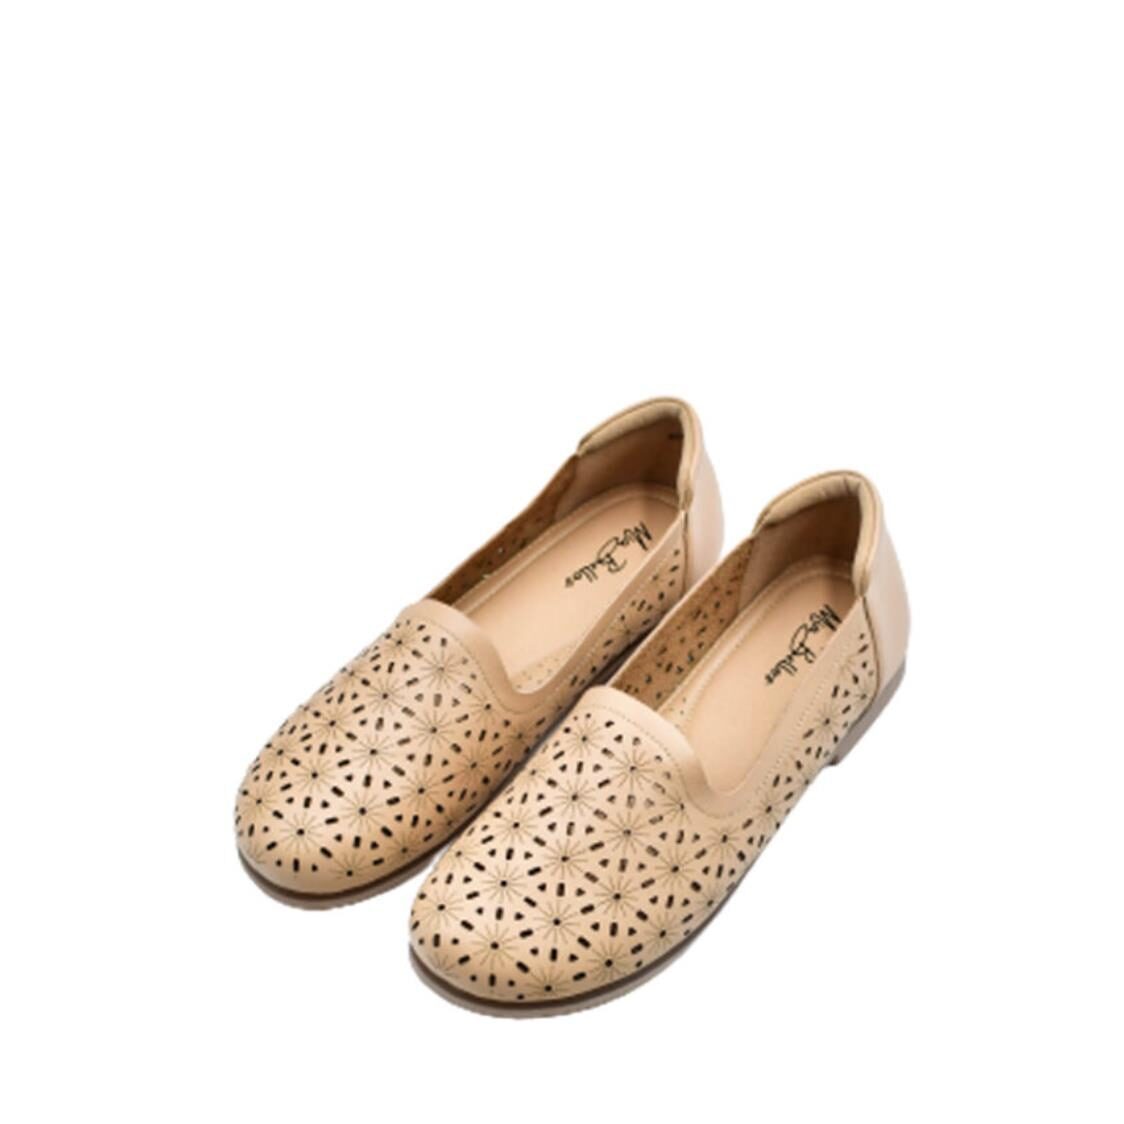 Mia Bellos Perforated Comfort Leather Shoe Almond MB5049